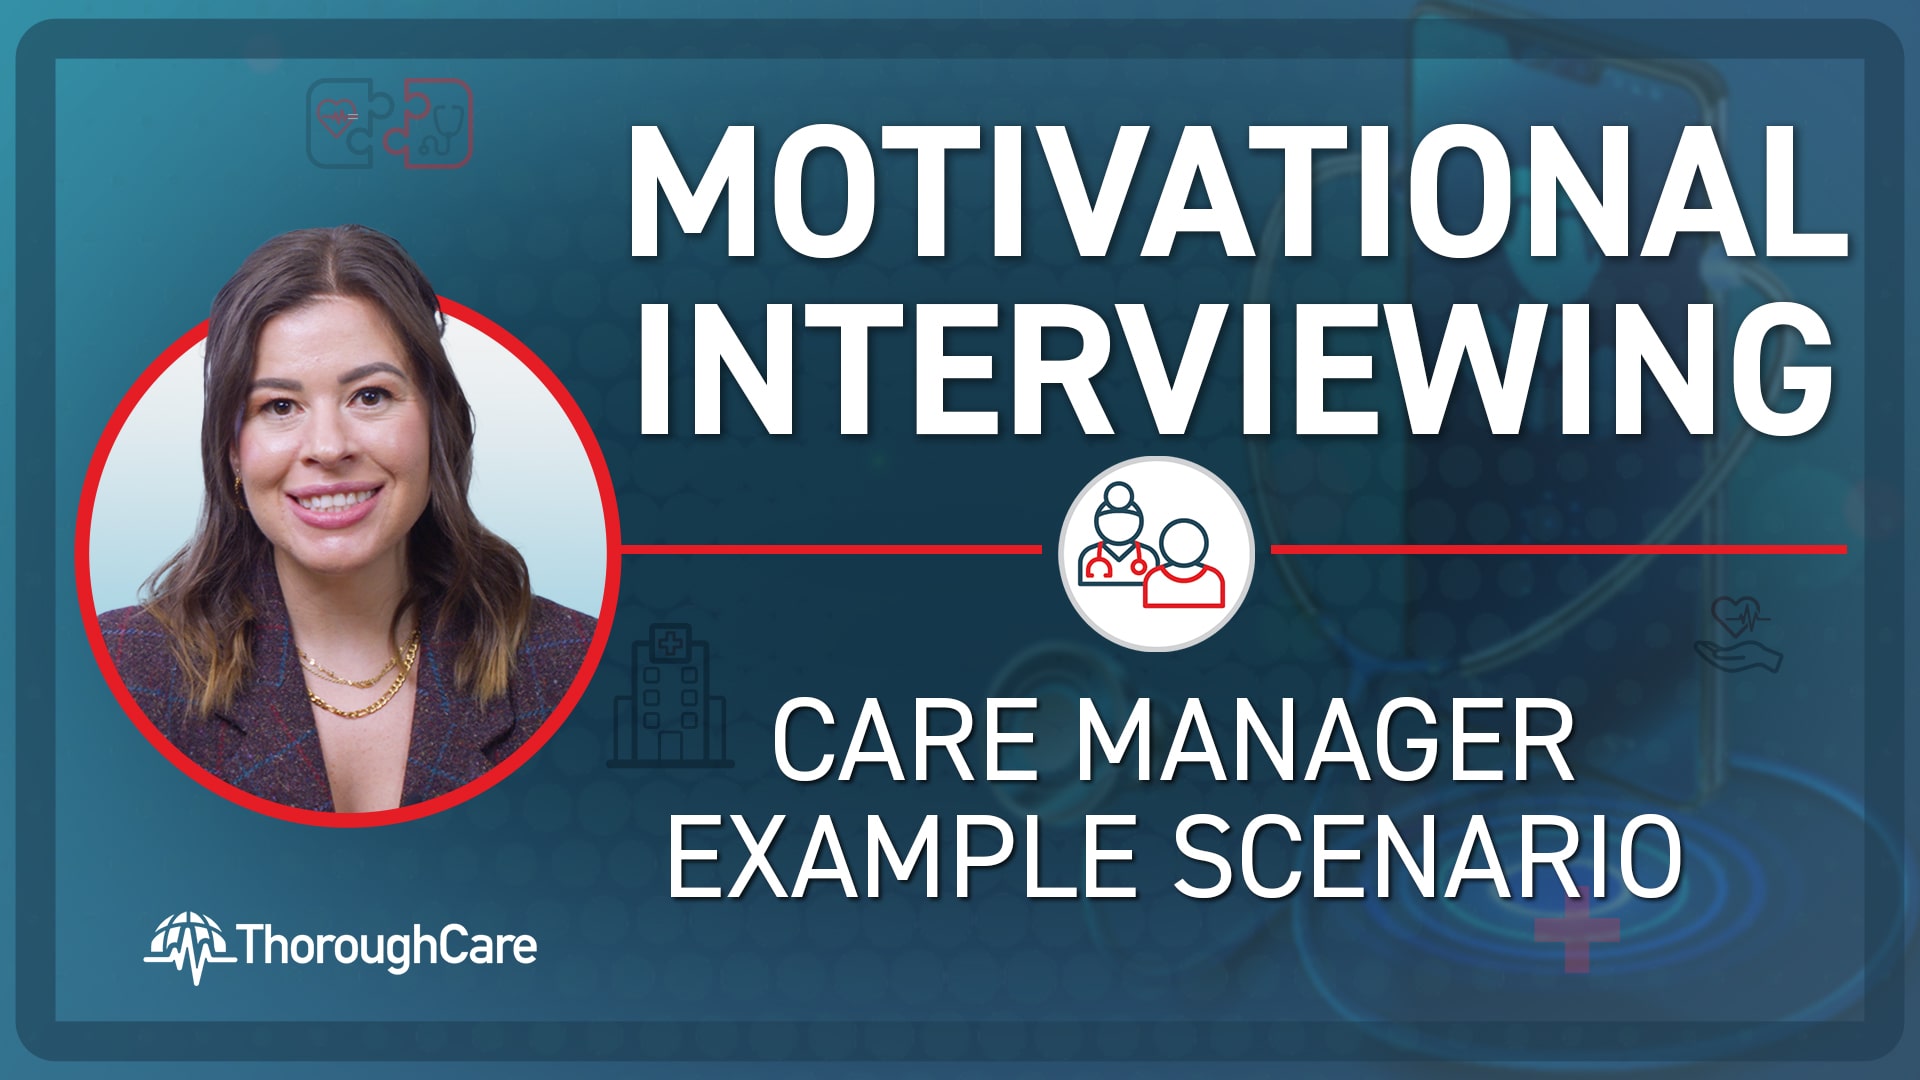 How to Utilize Motivational Interviewing in Care Management